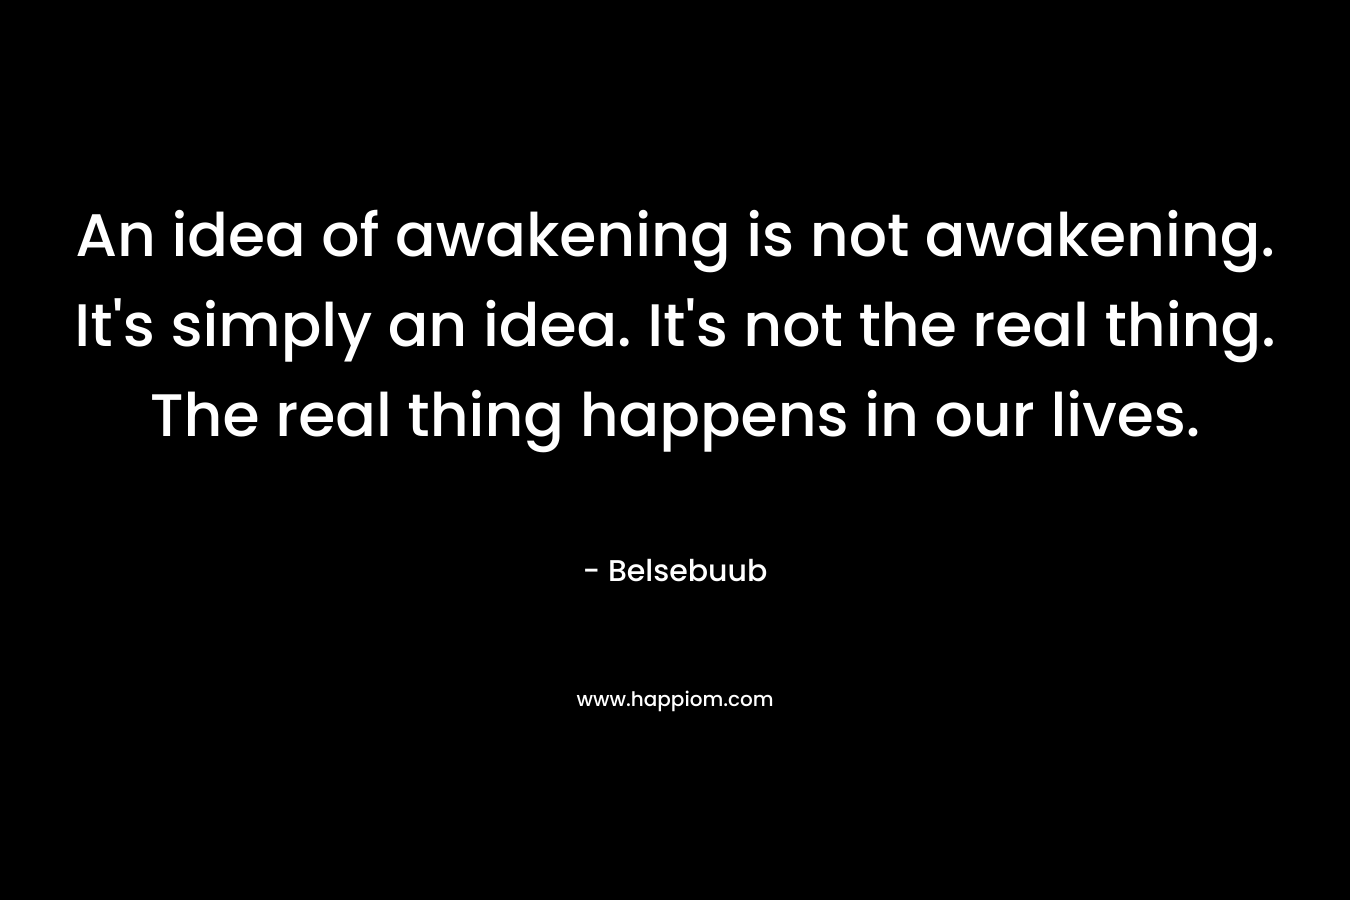 An idea of awakening is not awakening. It's simply an idea. It's not the real thing. The real thing happens in our lives.